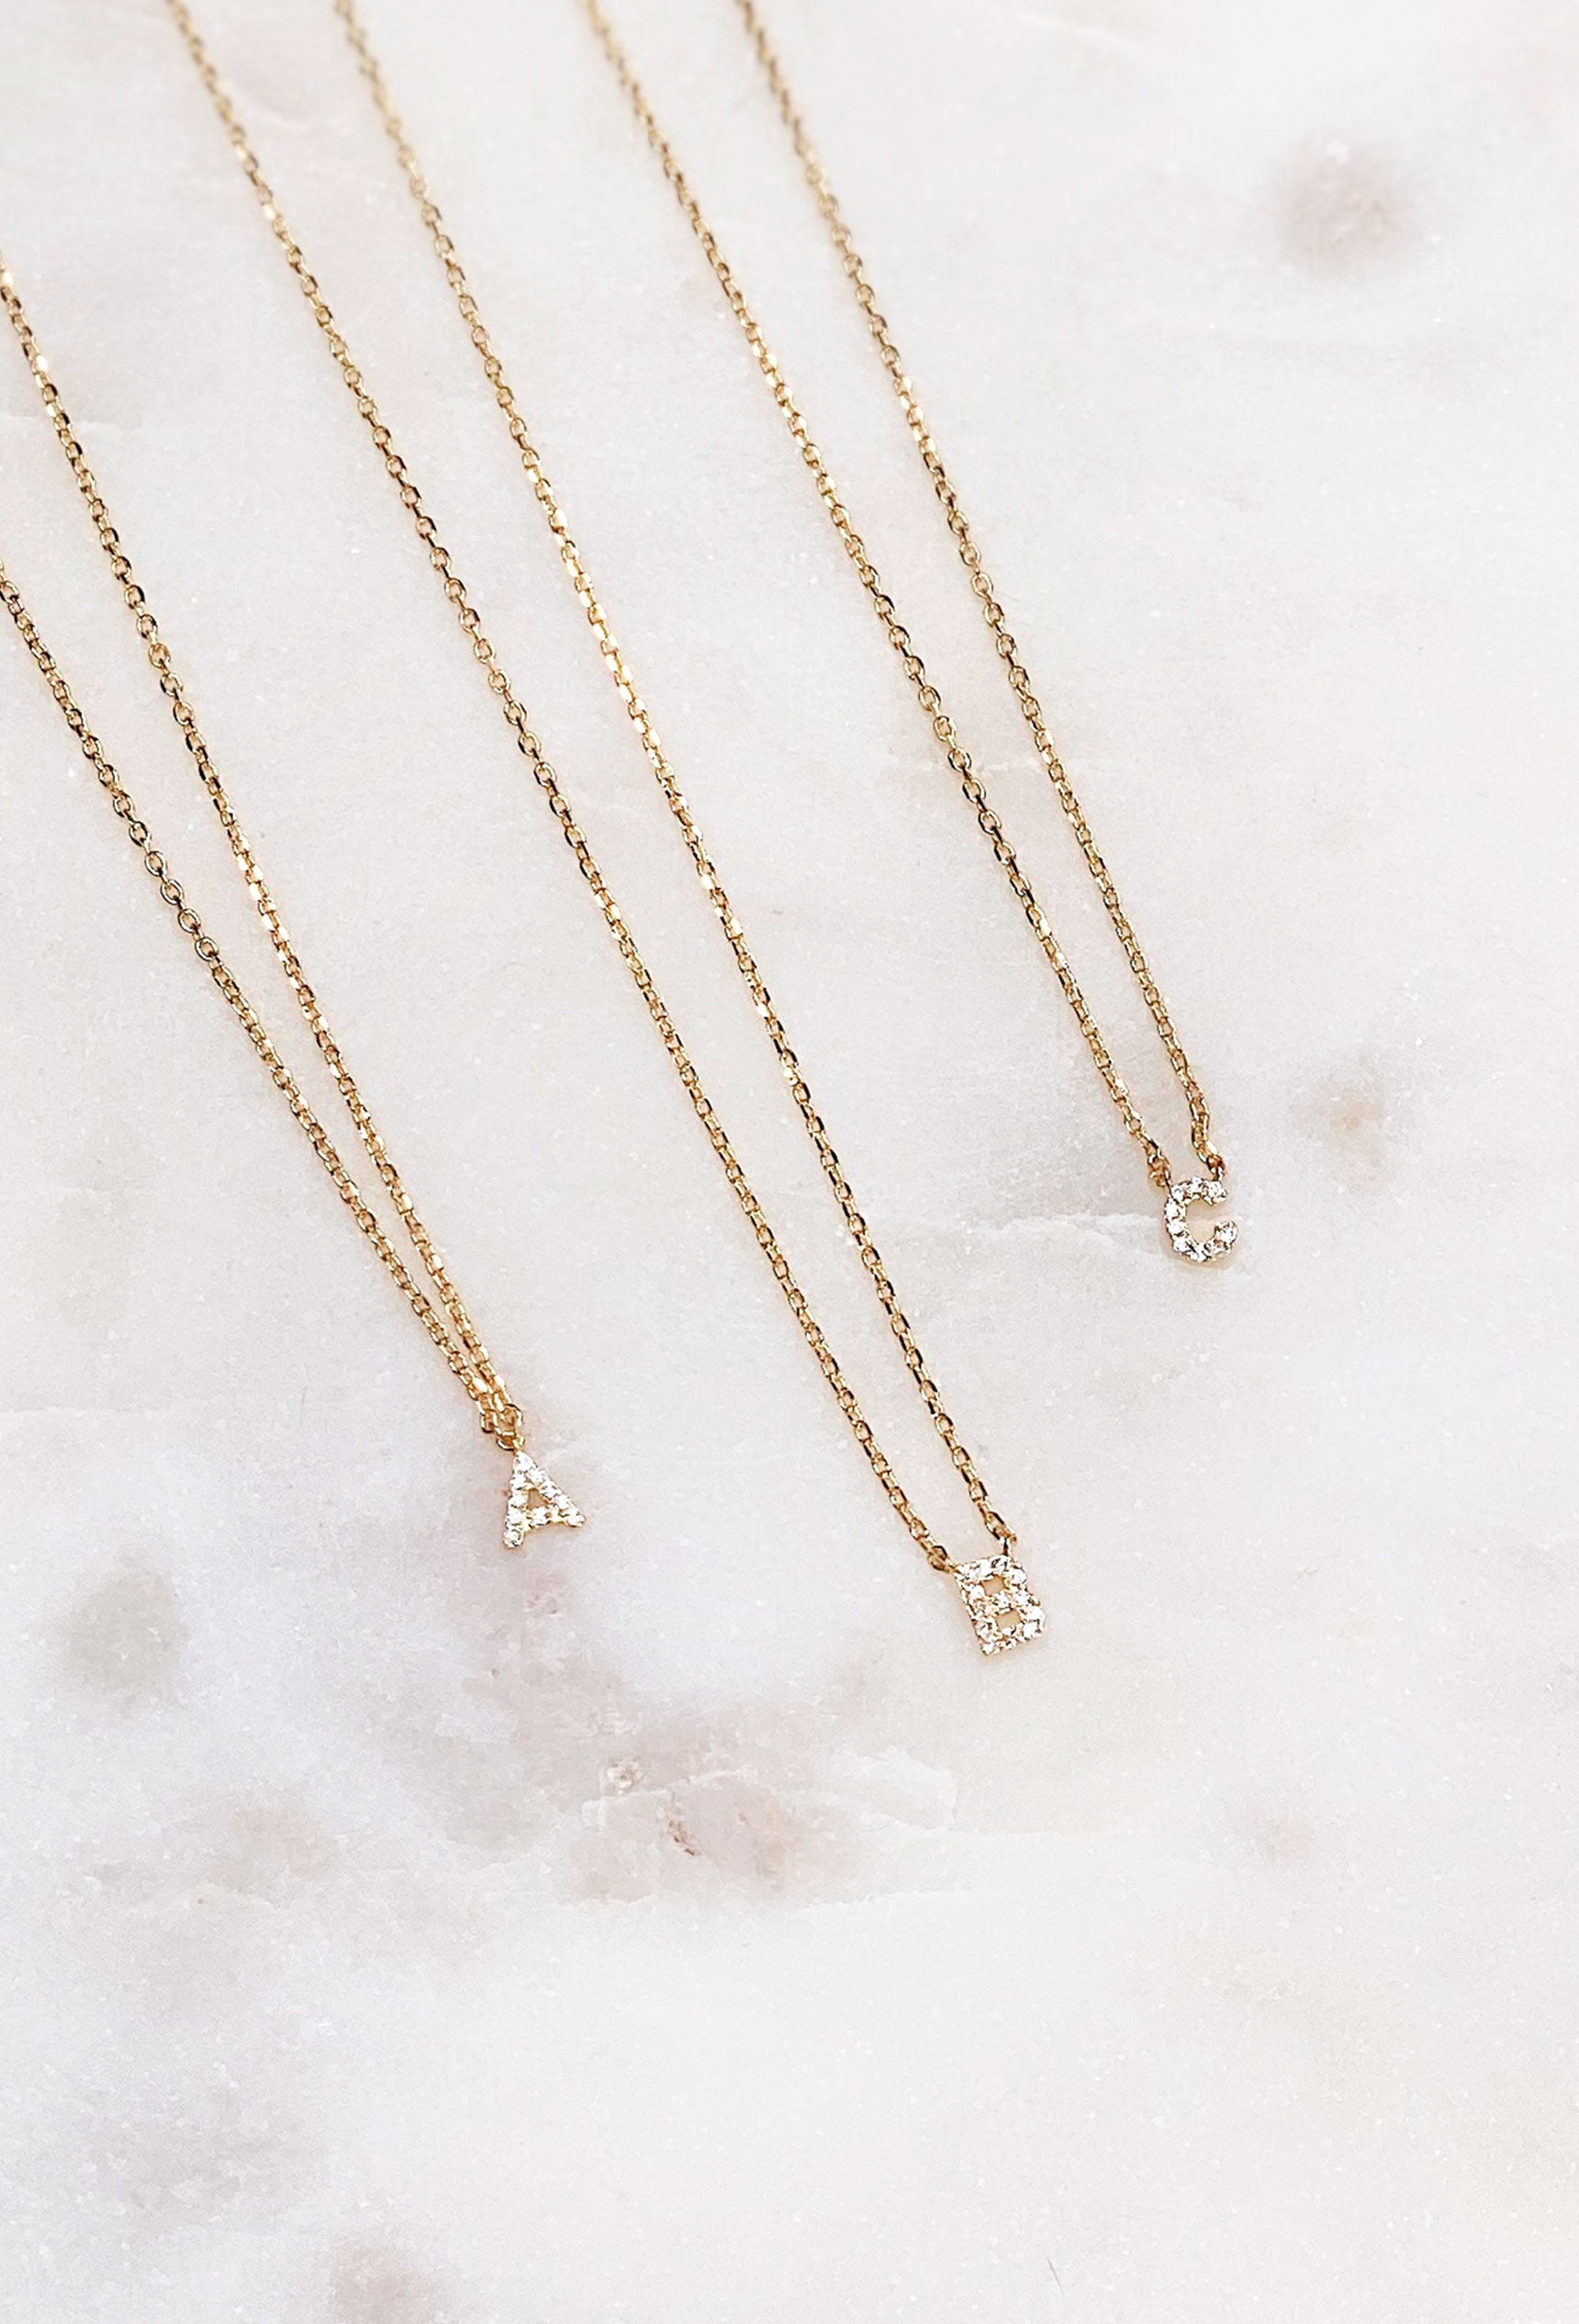 Mini Crystal Monogram Initial Necklace, gold chain necklaces with tiny crystal initial letters 